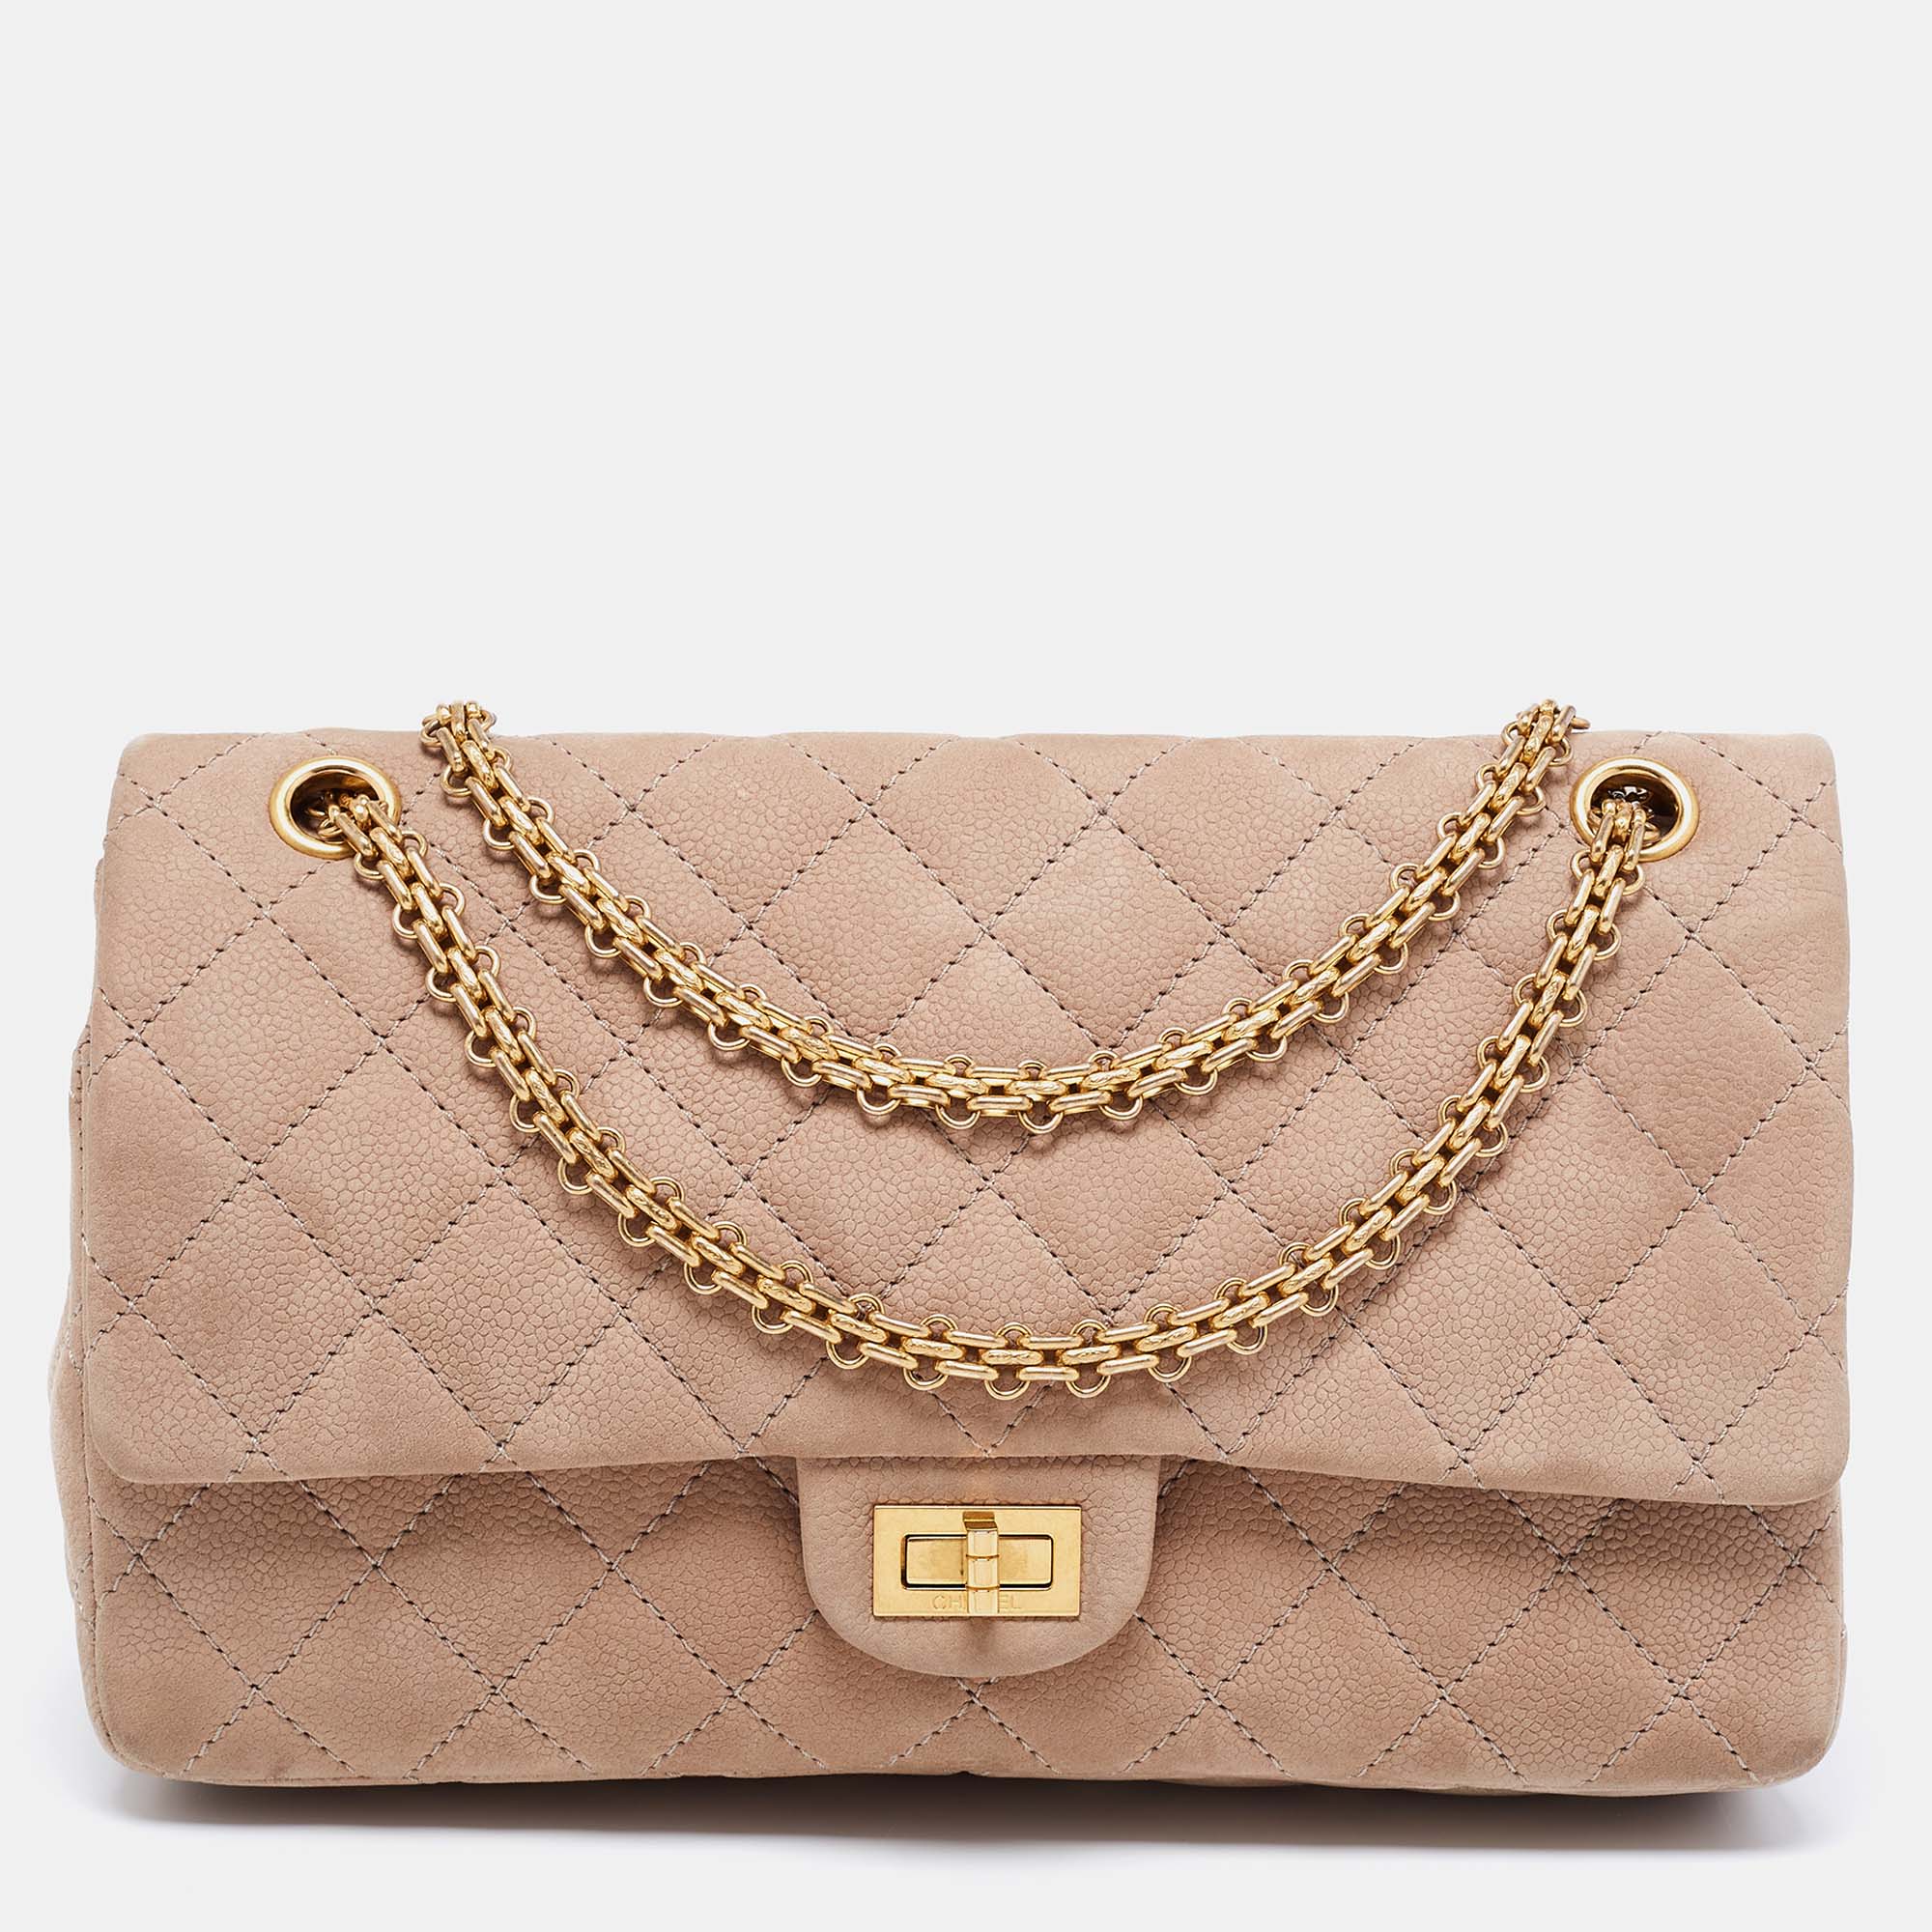 Chanel Beige Quilted Caviar Nubuck Leather Reissue 2.55 Classic 226 Fl